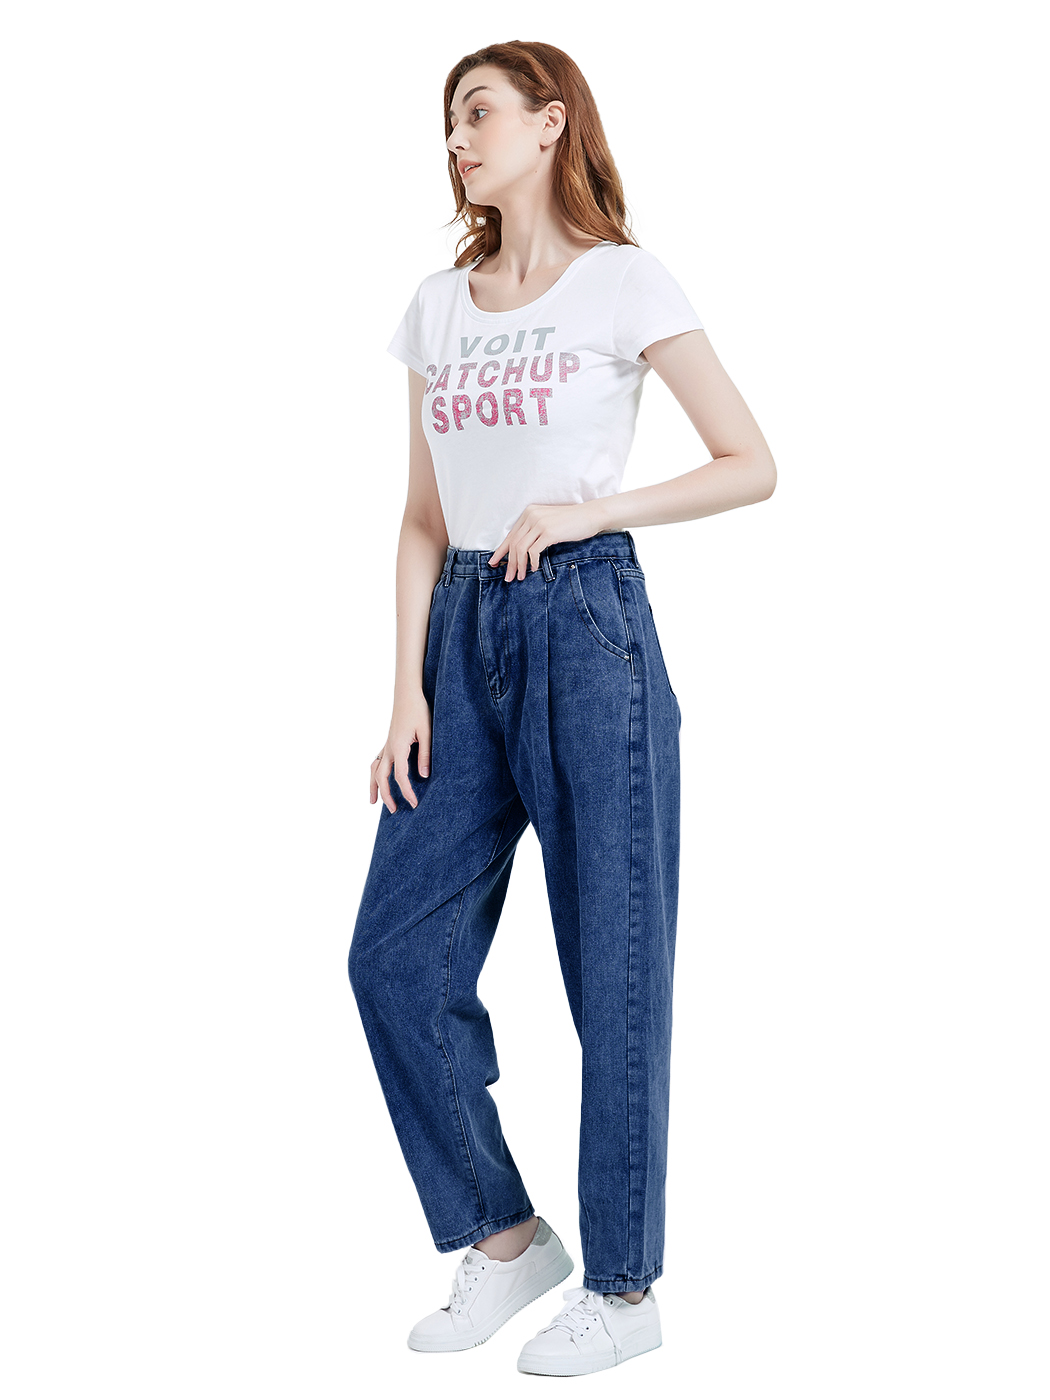 Women's Classic High Waisted Boyfriend Cropped Denim Jeans Loose Harem Pants - image 5 of 7